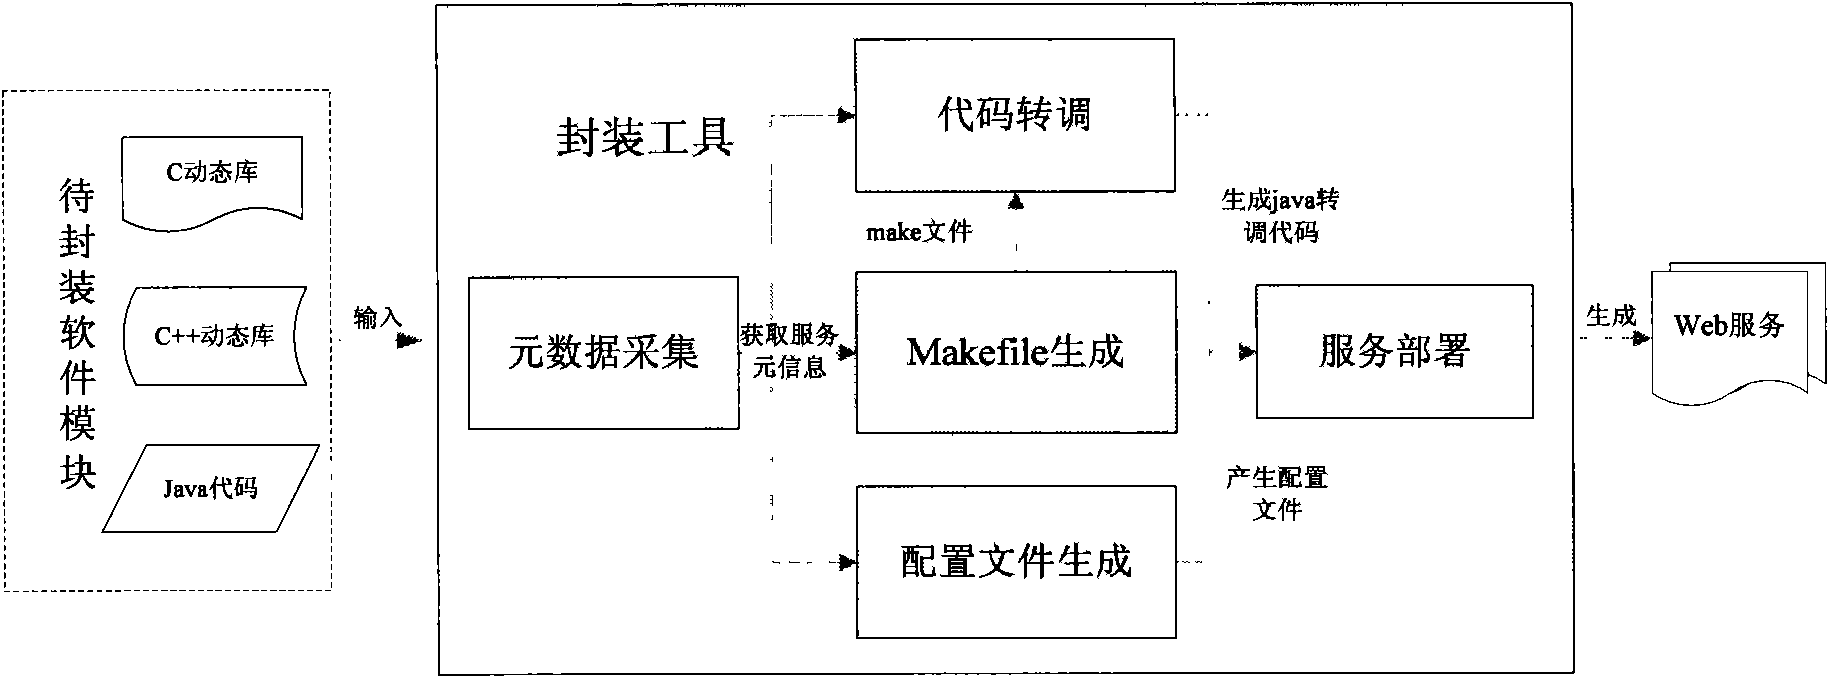 Software component service packaging method